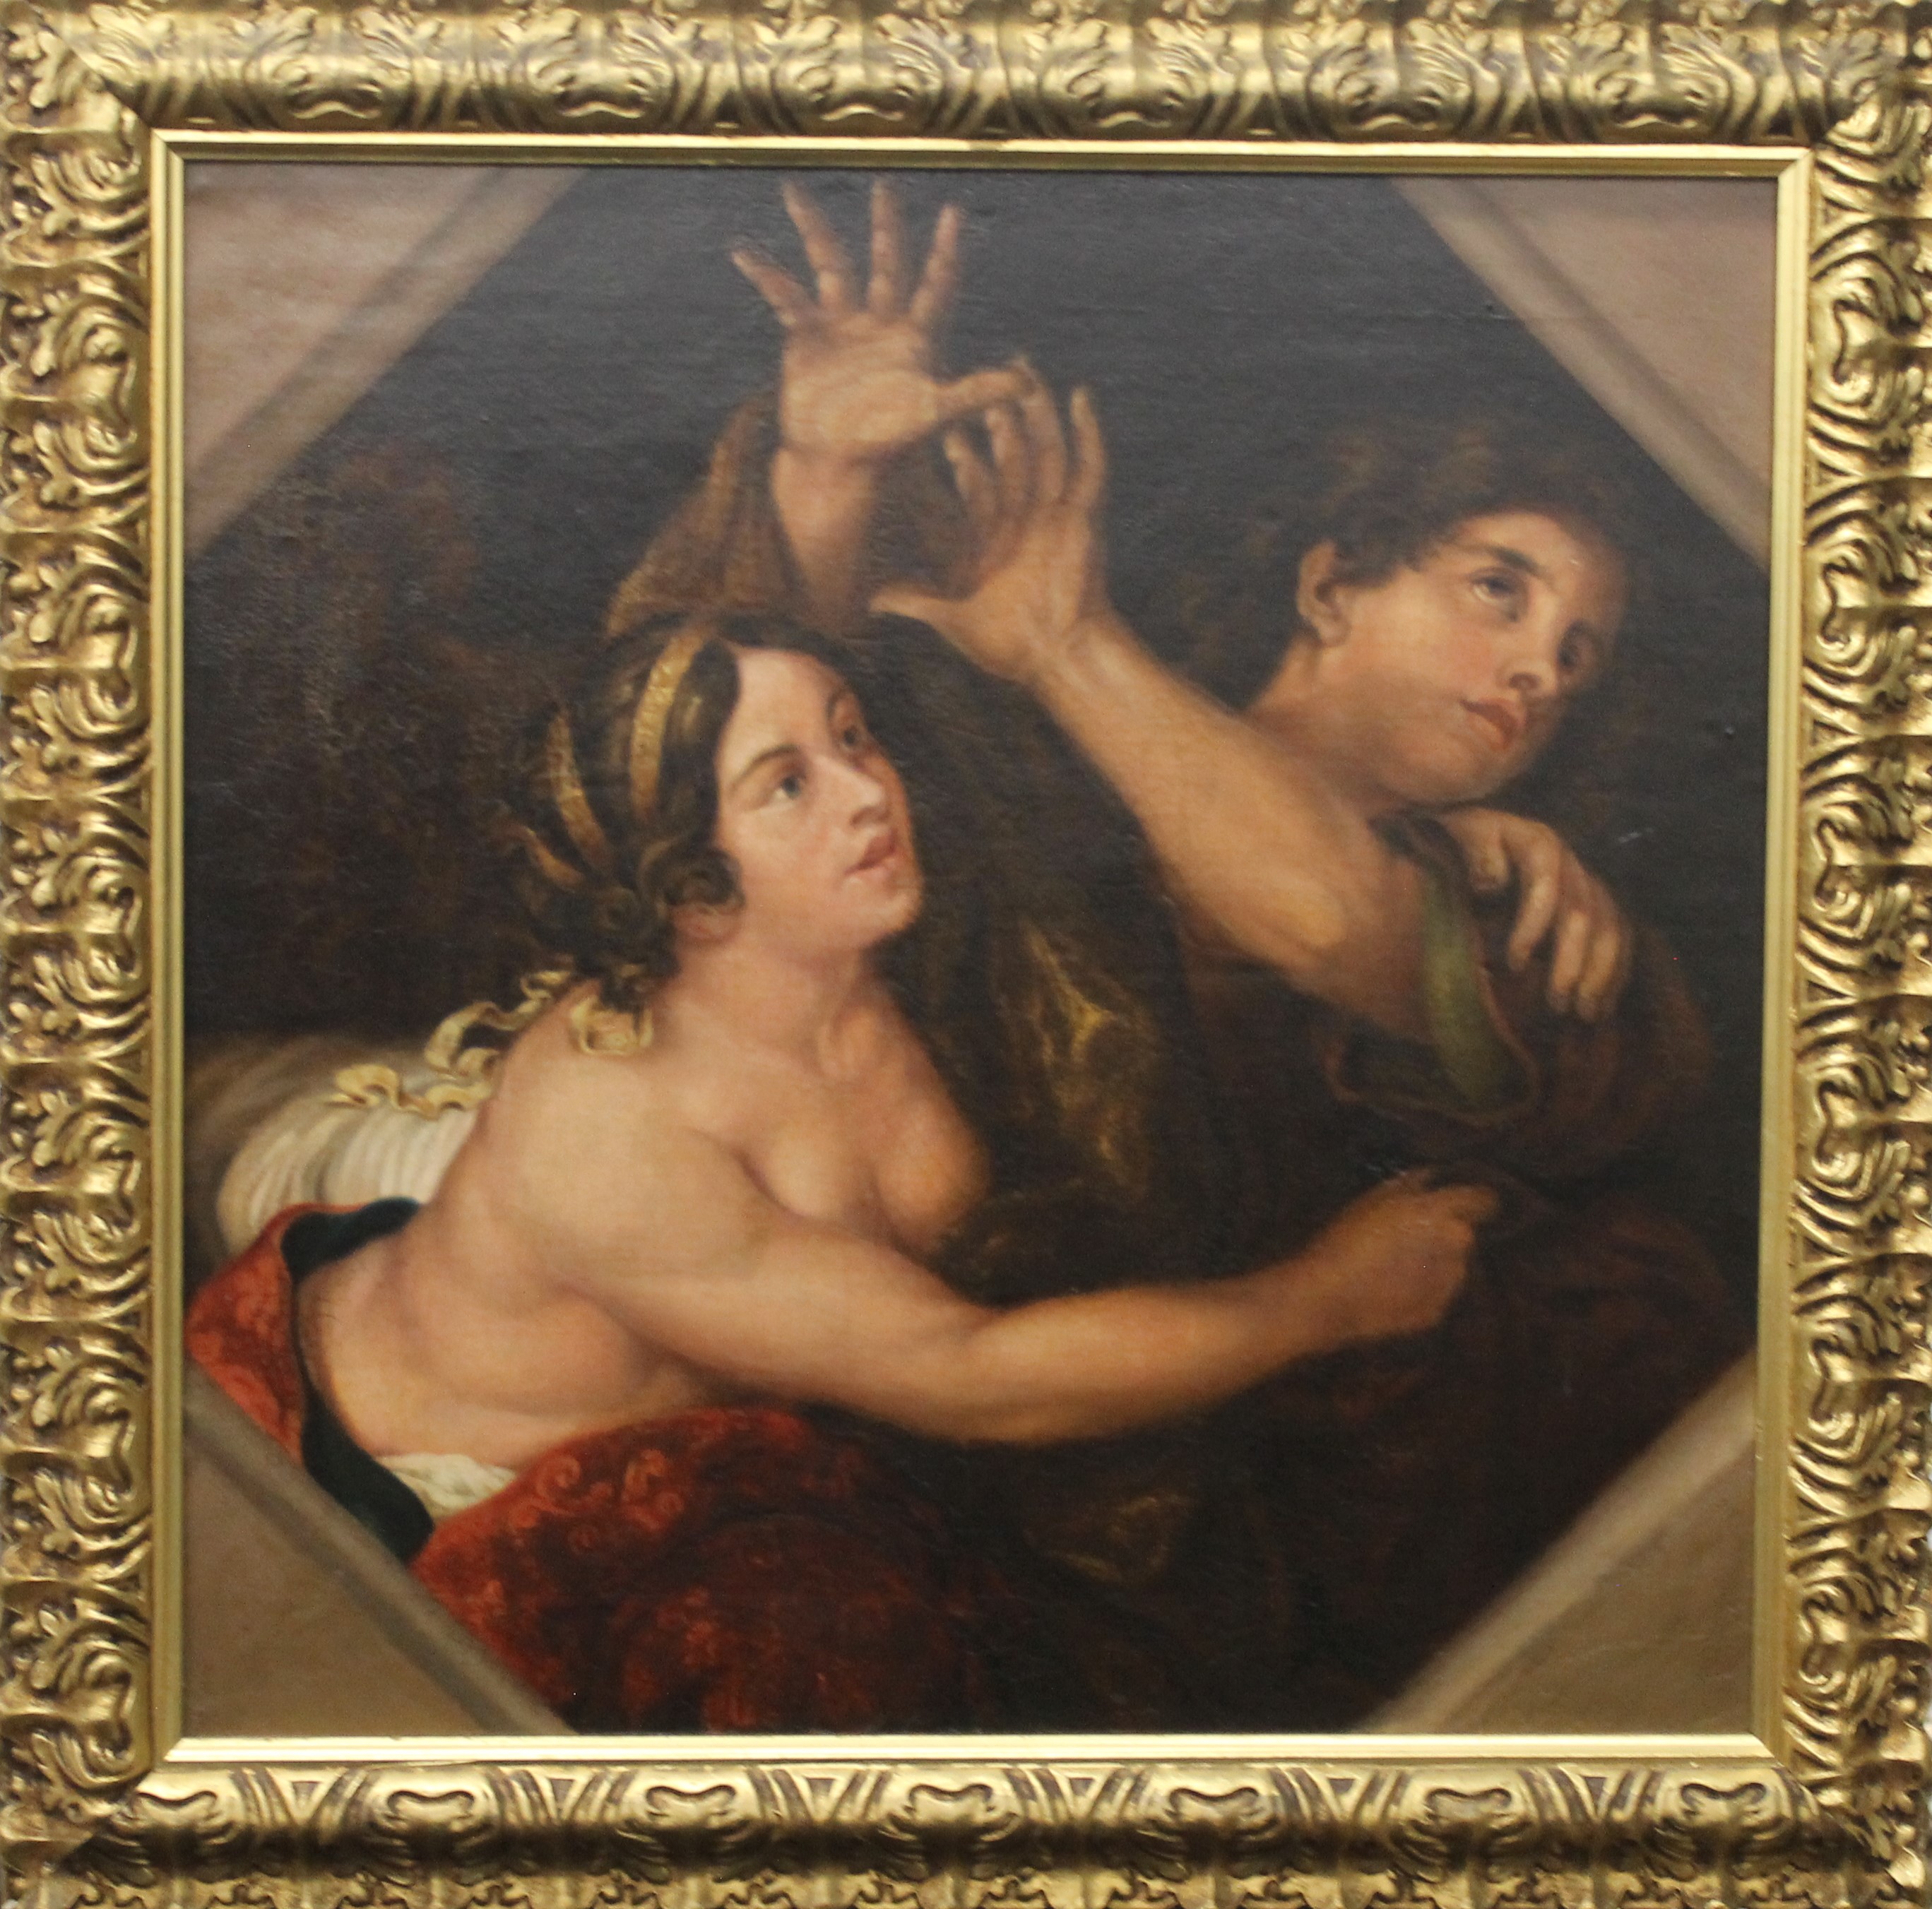 ITALIAN SCHOOL (18th/19th century), Young Lovers, oil on board, framed. 62 x 62 cm. - Image 2 of 2